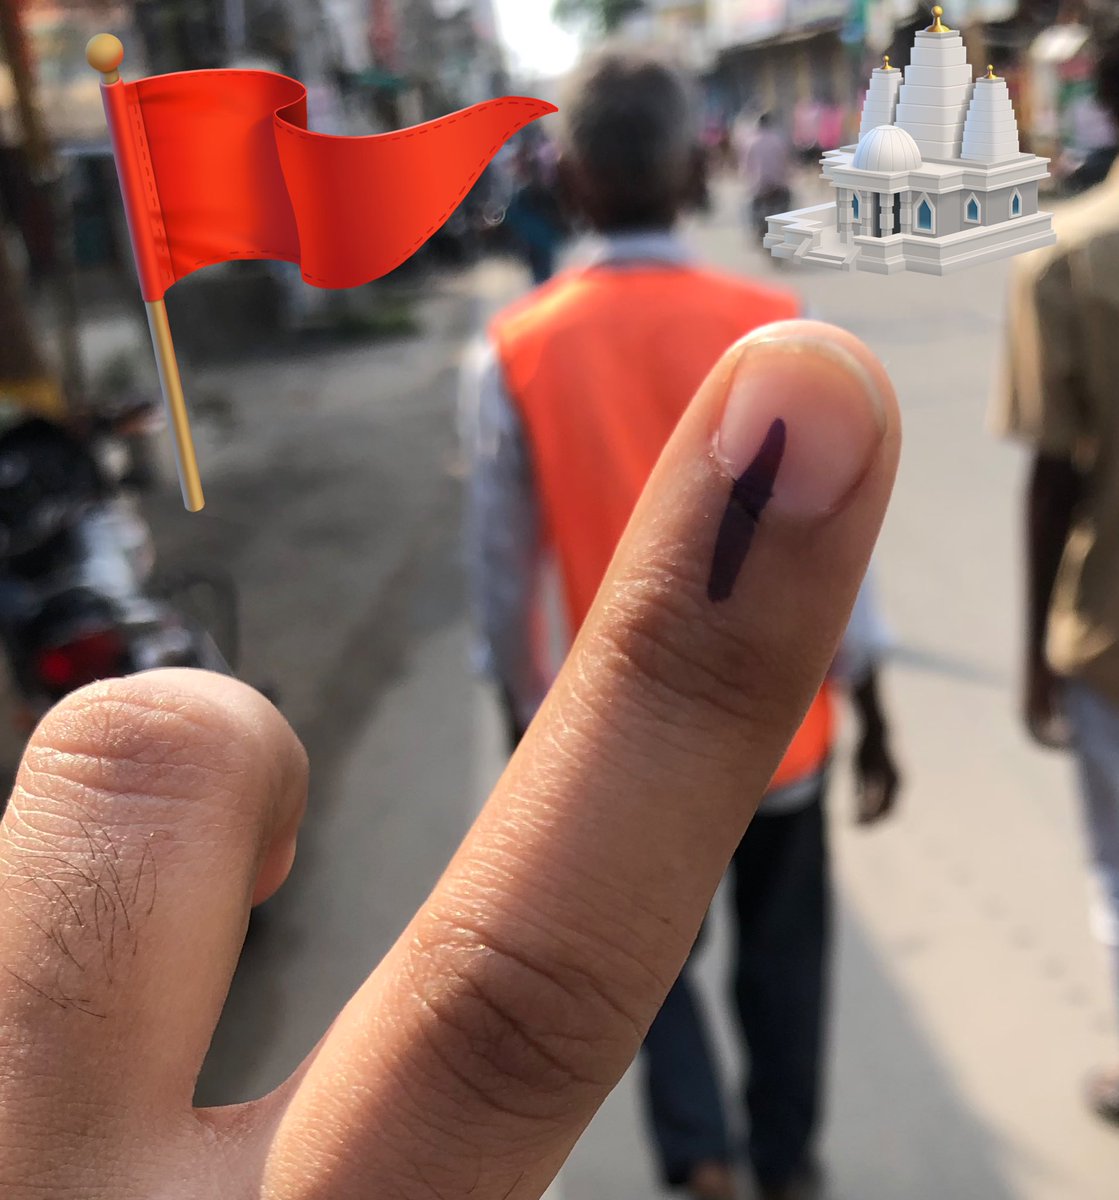 Voted for Fascism, Dictatorship, Bigotry, Hindutva extremism. 🪷

Go out and Vote for the same 🙂